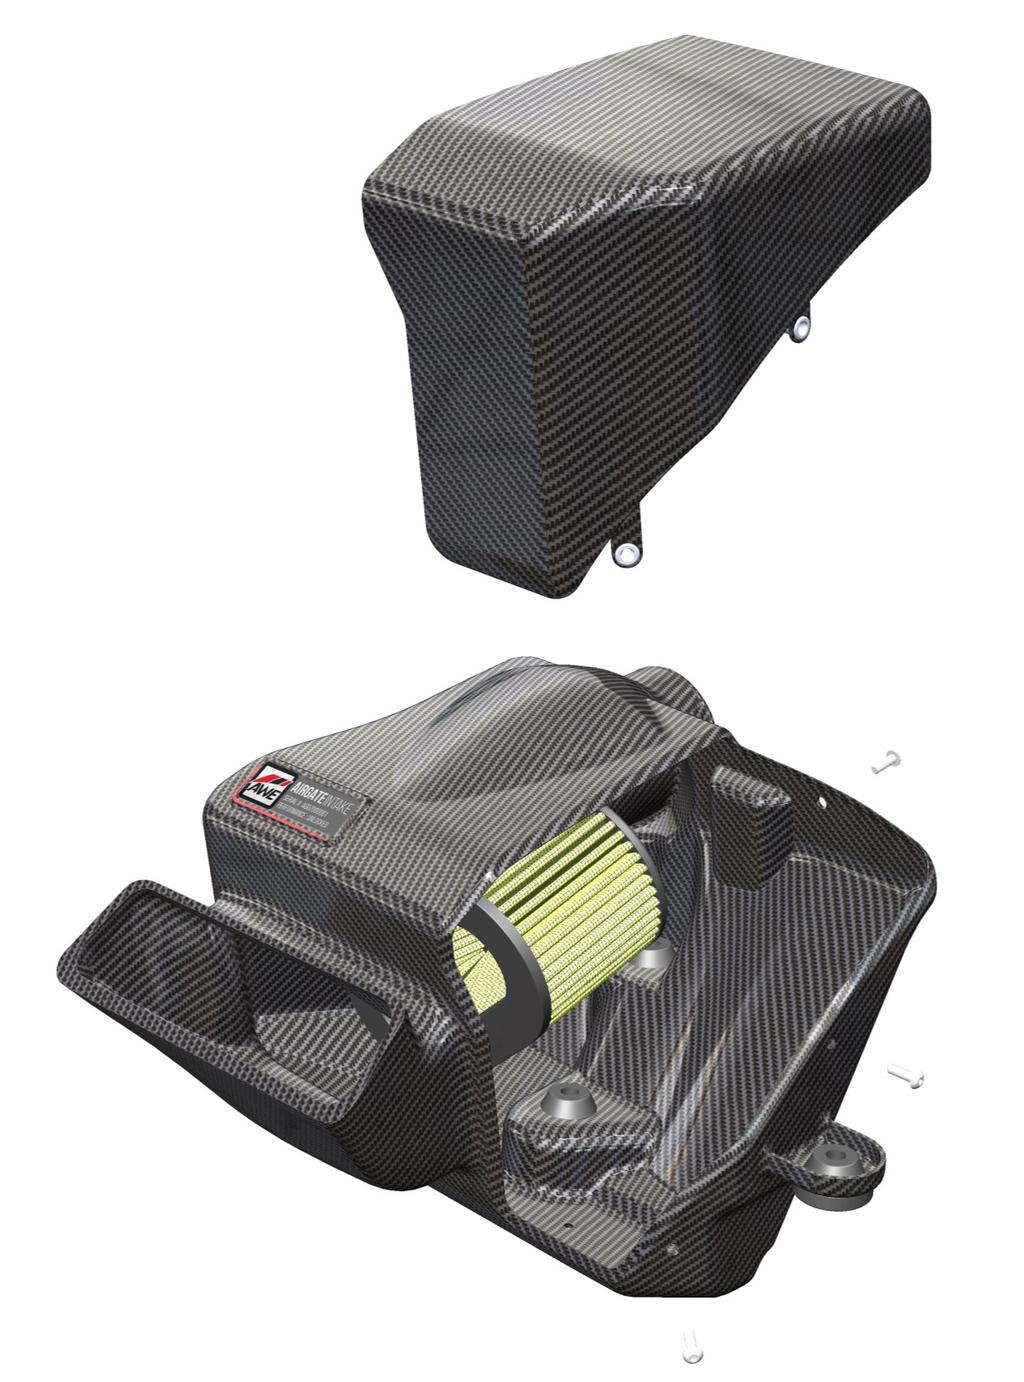 Thank you for your purchase of the AWE AirGate Carbon Intake system for the 2015+ VW / Audi MQB 1.8T or 2.0T.